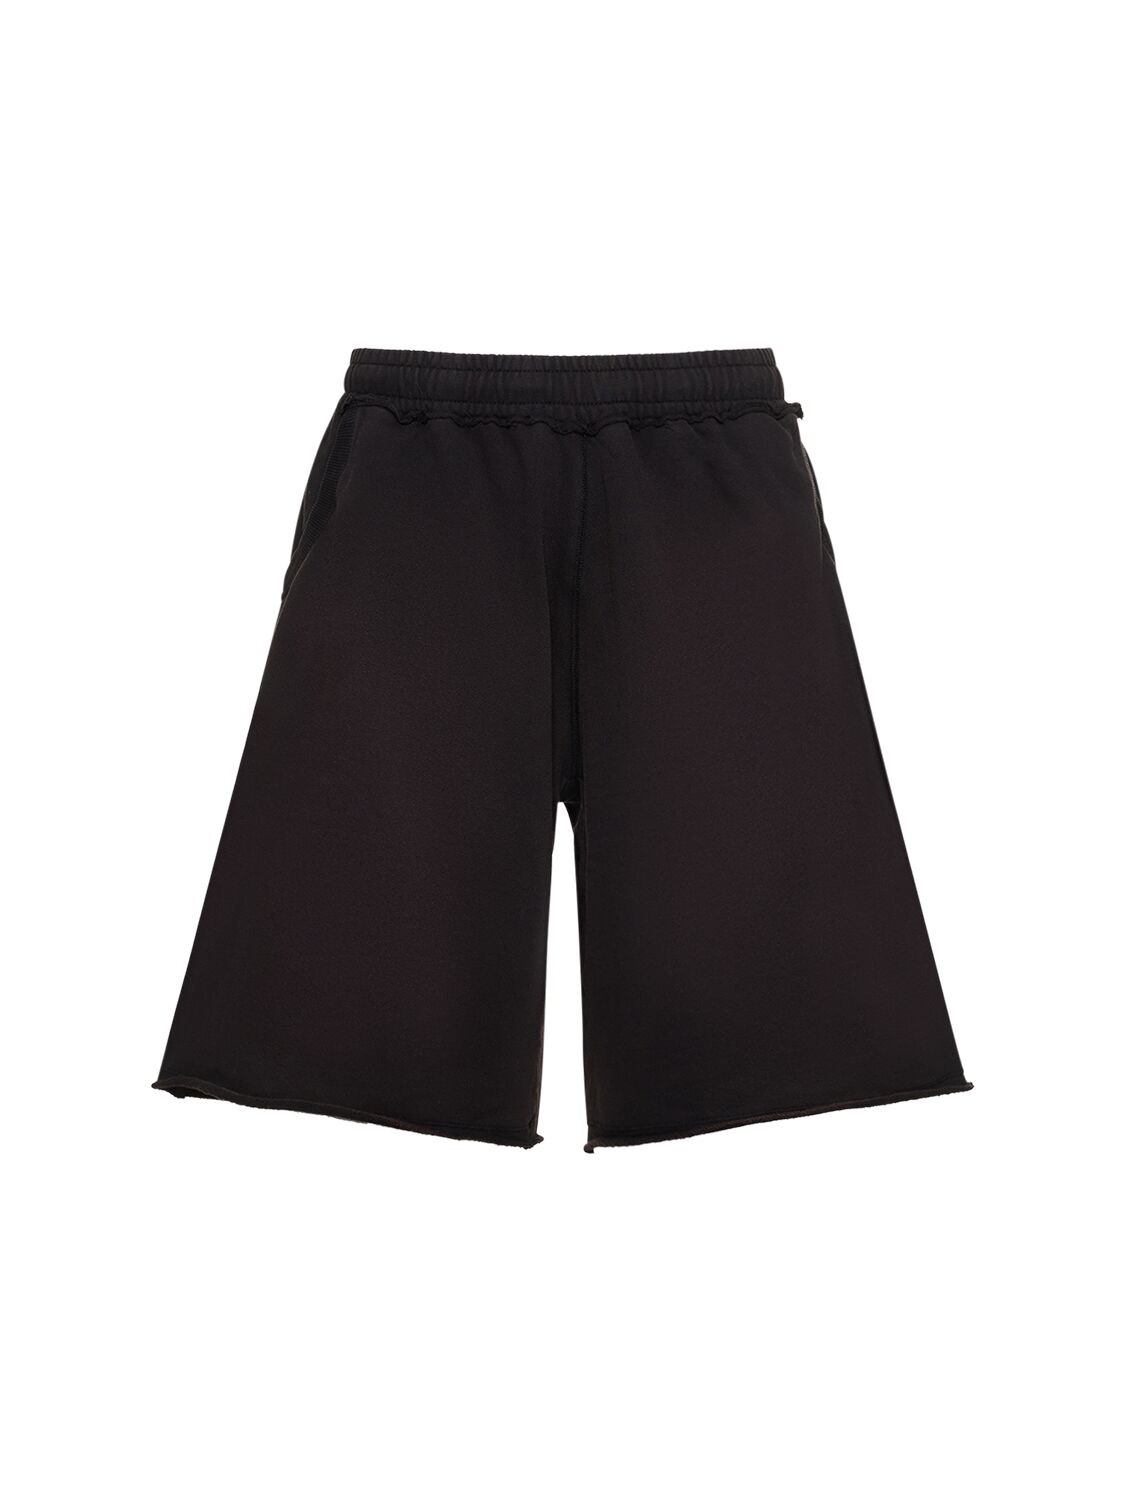 Colossus Washed Cotton Jersey Shorts